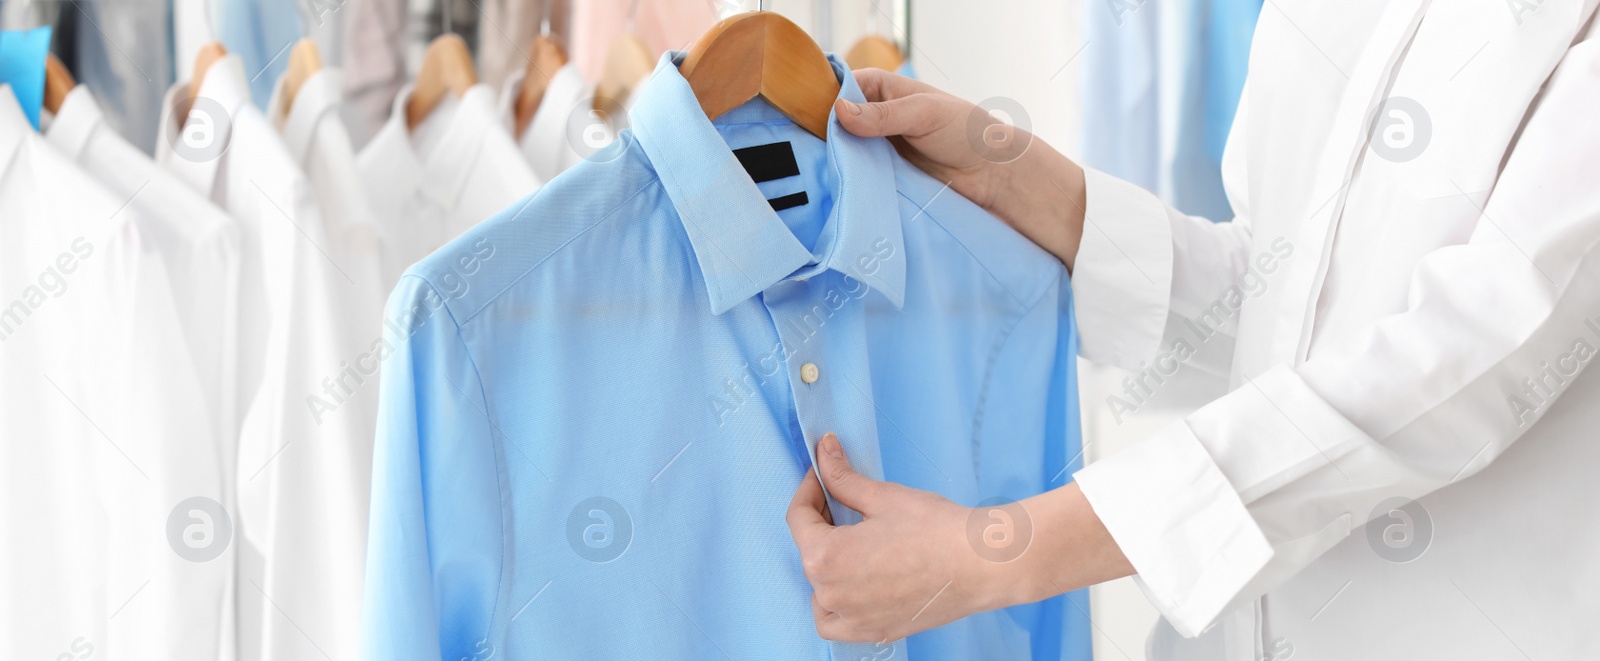 Image of Young woman holding hanger with shirt, banner design. Dry-cleaning service